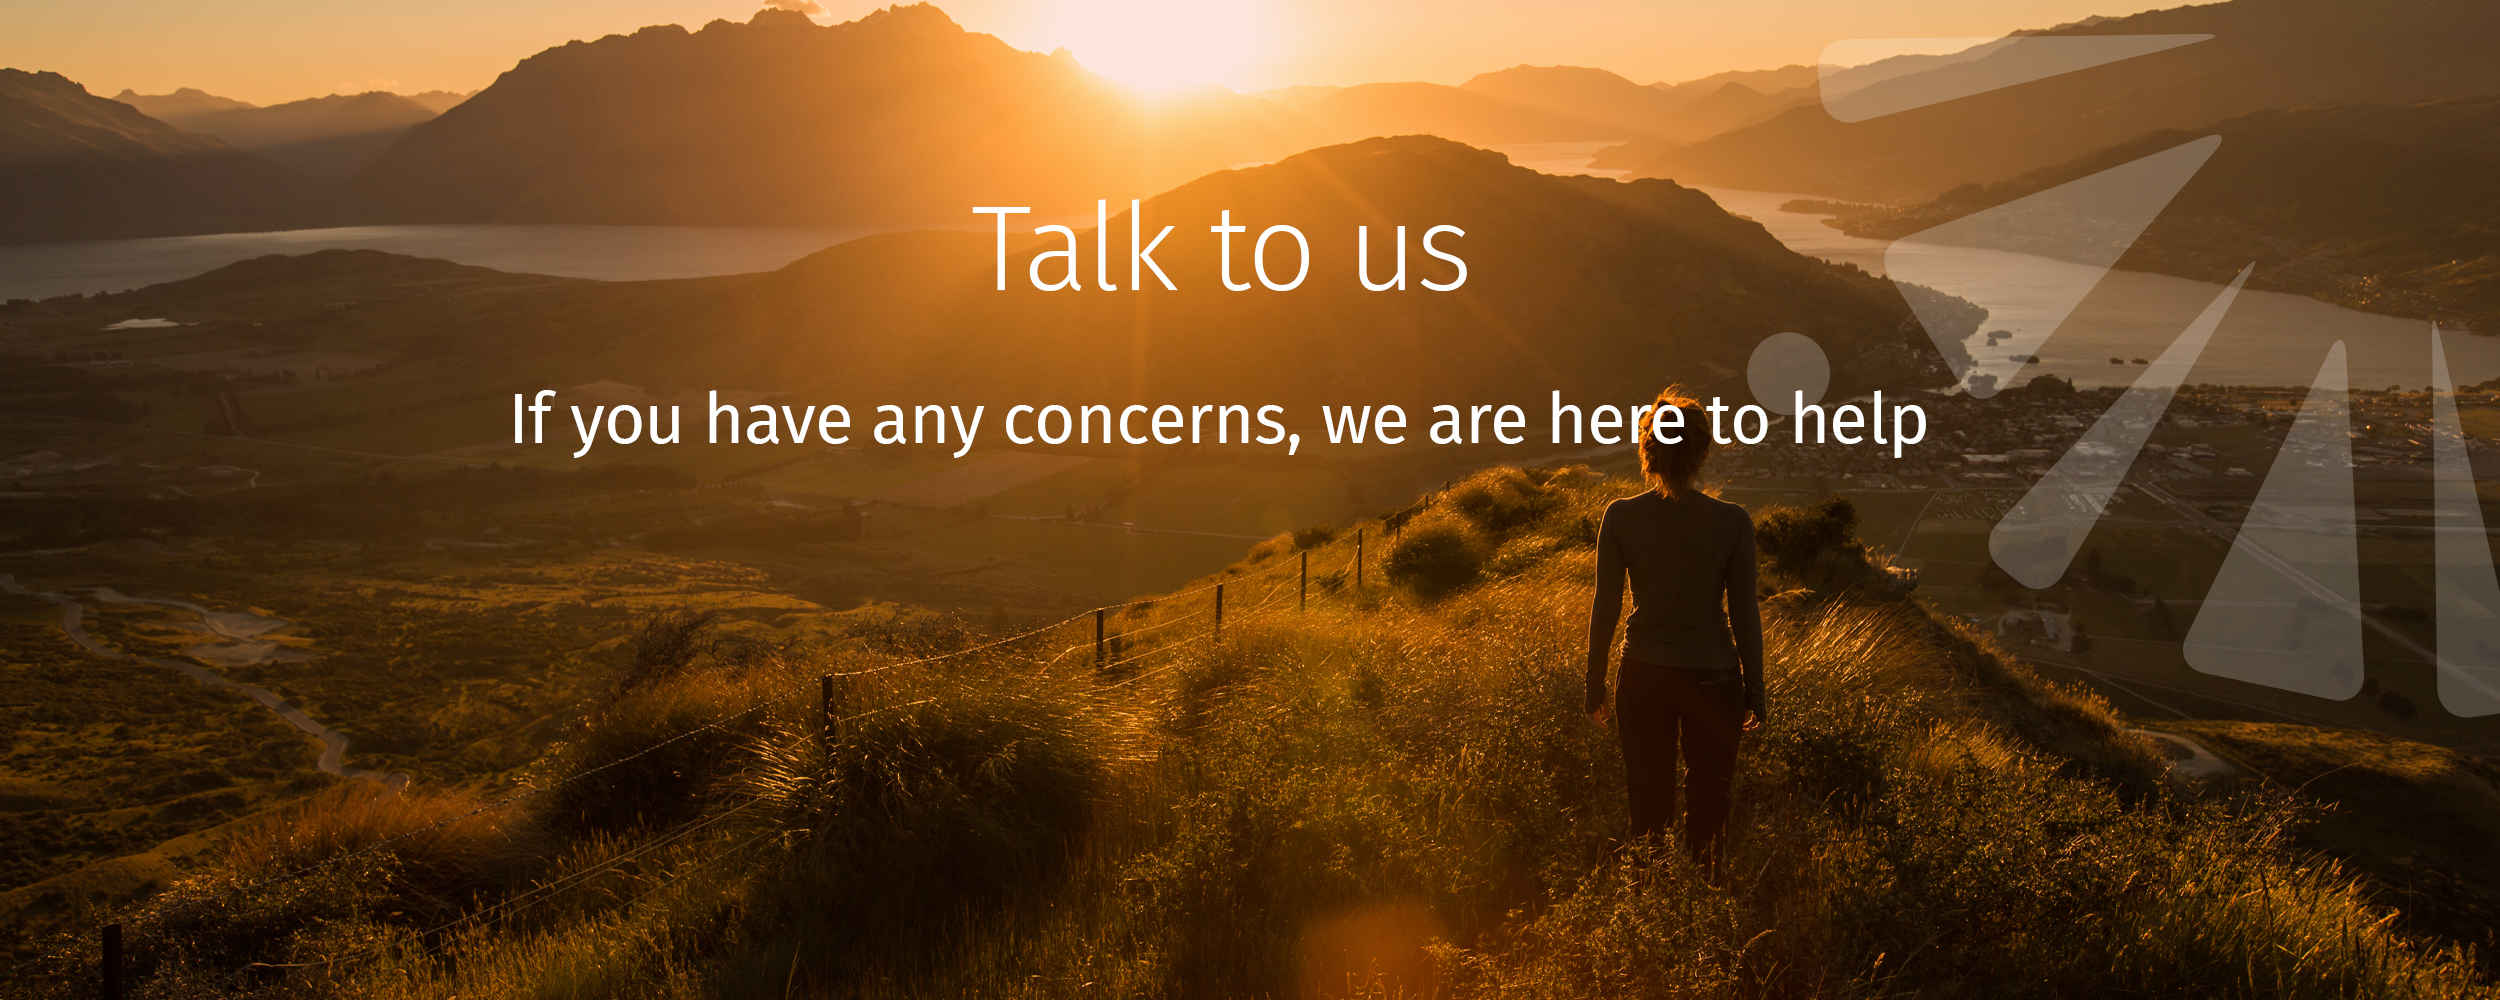 If you have any concerns, we are here to help